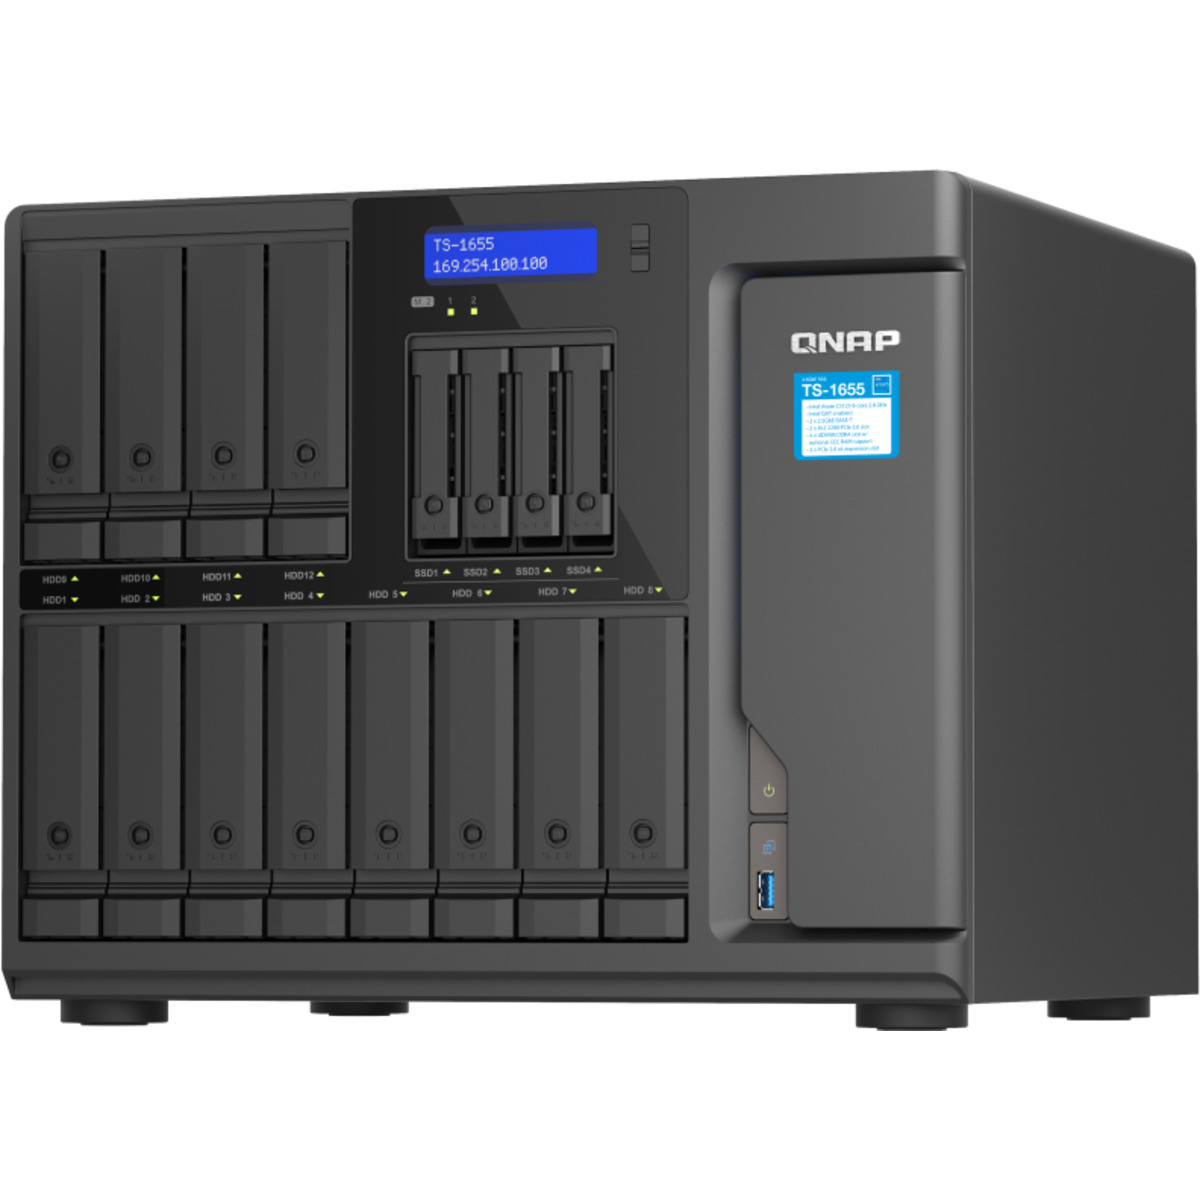 buy $8941 QNAP TS-1655 264tb Desktop NAS - Network Attached Storage Device 12x22000gb Western Digital Red Pro WD221KFGX 3.5 7200rpm SATA 6Gb/s HDD NAS Class Drives Installed - Burn-In Tested - ON SALE - FREE RAM UPGRADE - nas headquarters buy network attached storage server device das new raid-5 free shipping simply usa TS-1655